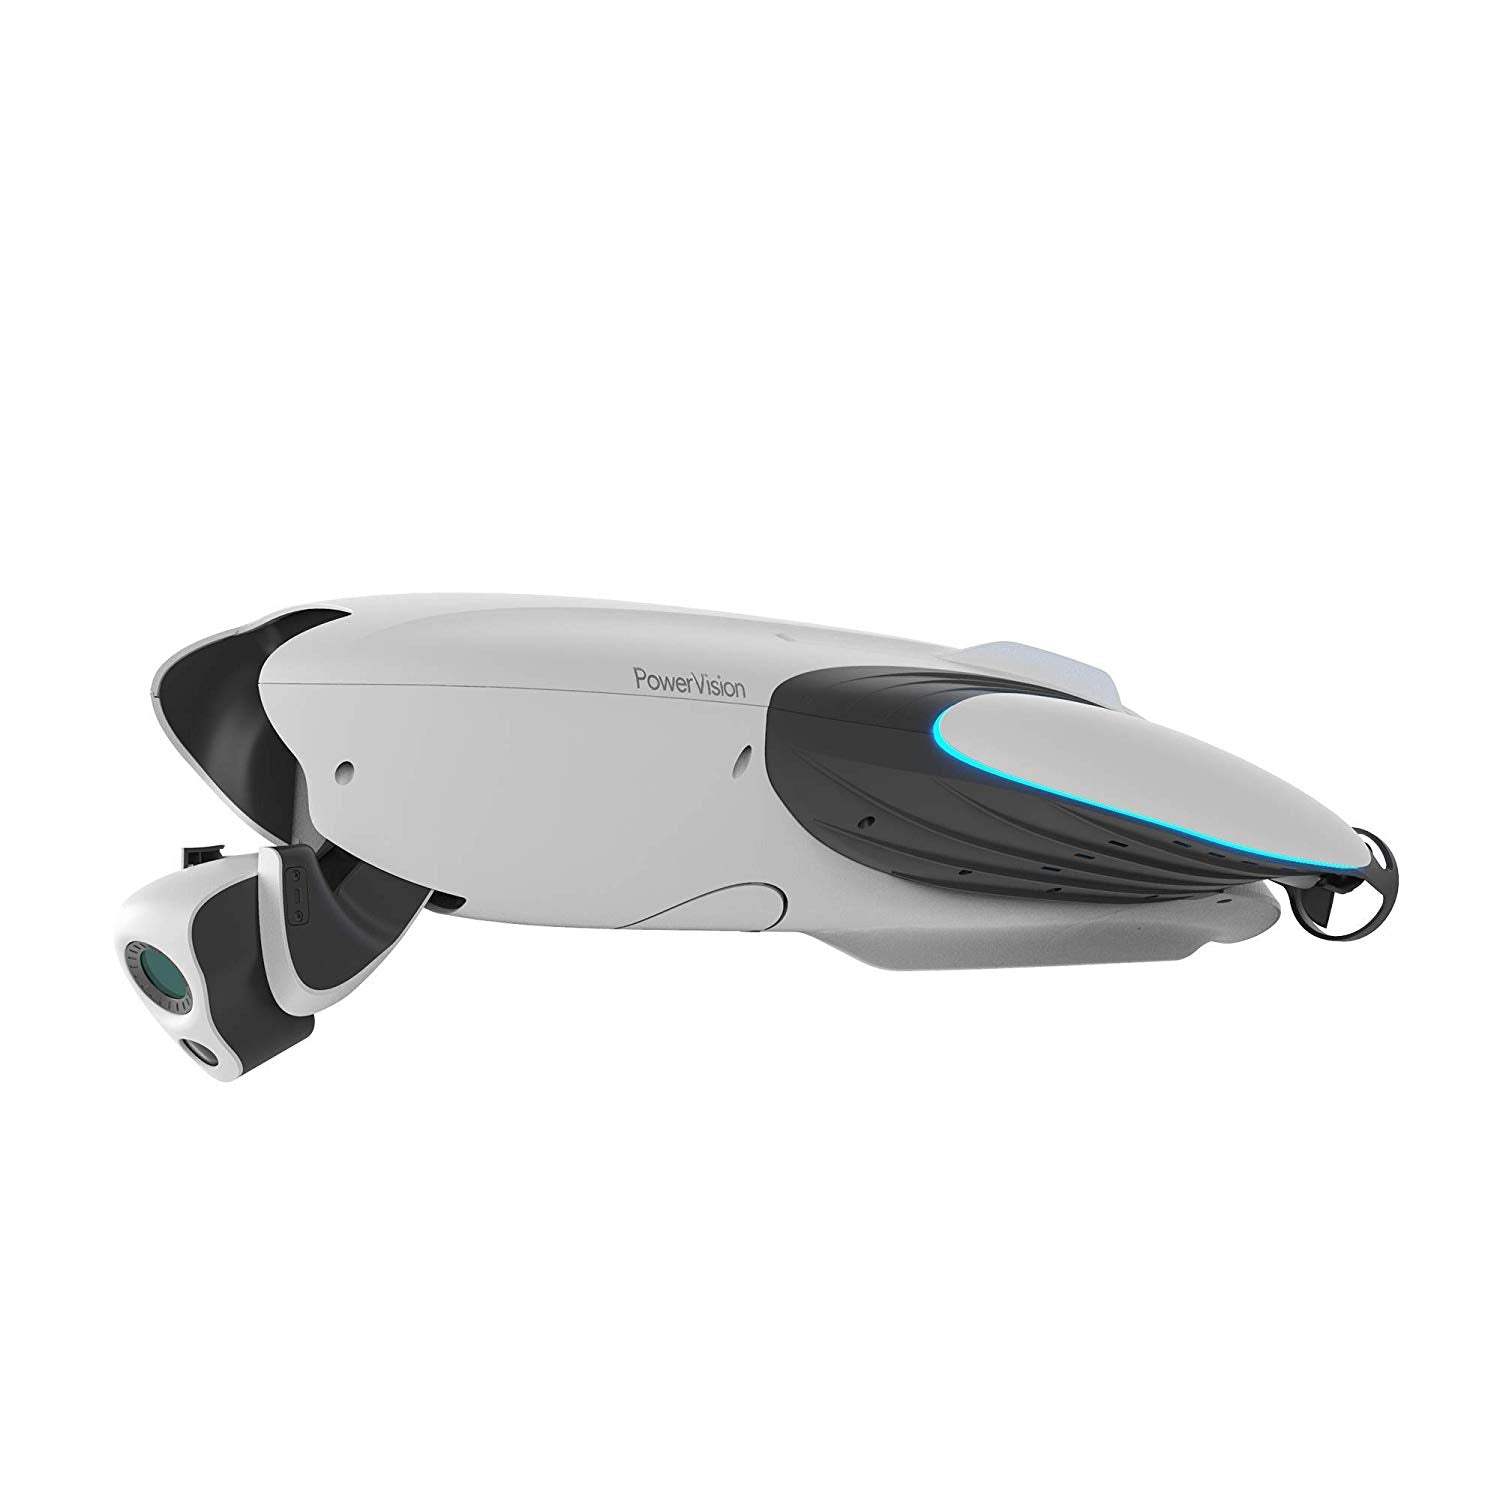 PowerVision Powerdolphin Wizard Water Surface Drone with 4K UHD Camera